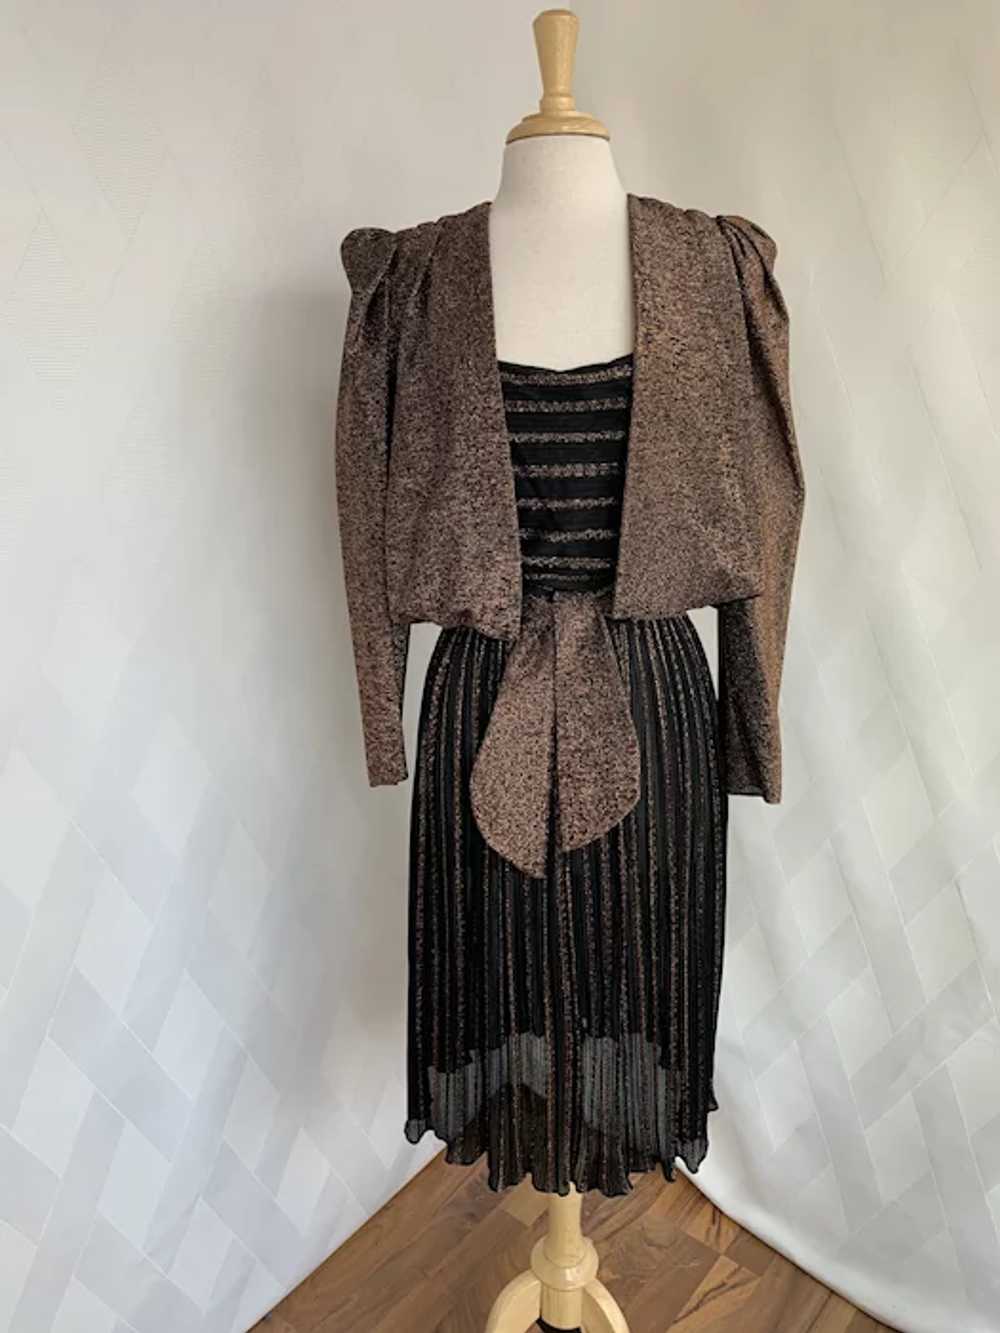 1980s Strappy, Copper Metallic Dress with Jacket - image 2